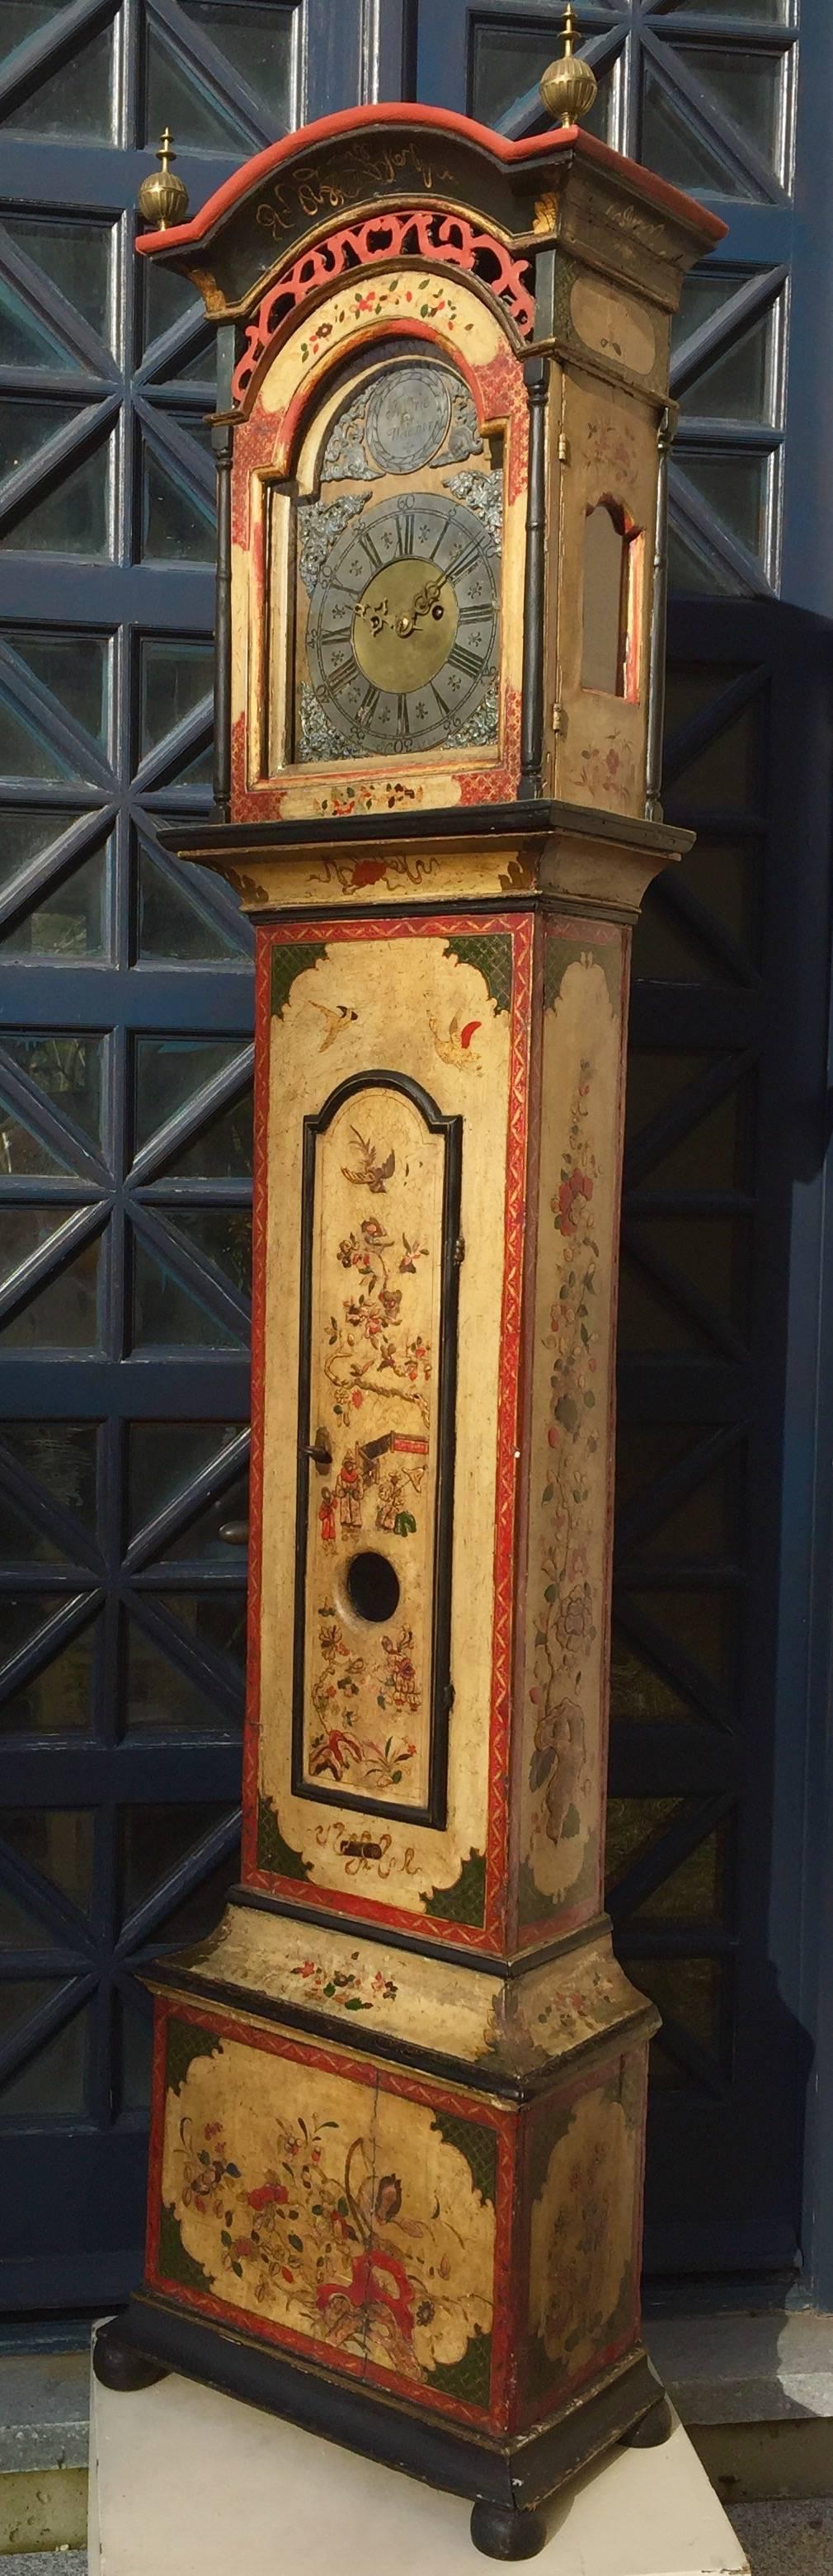 18th Century Chinoiserie Painted Grandfather Clock by Fredric Weleher. This absolutely charming grandfather clock was crafted in Denmark by Fredric Weleher in the Chinese Chippendale style, circa 1780.
The background is aged white, which has turned